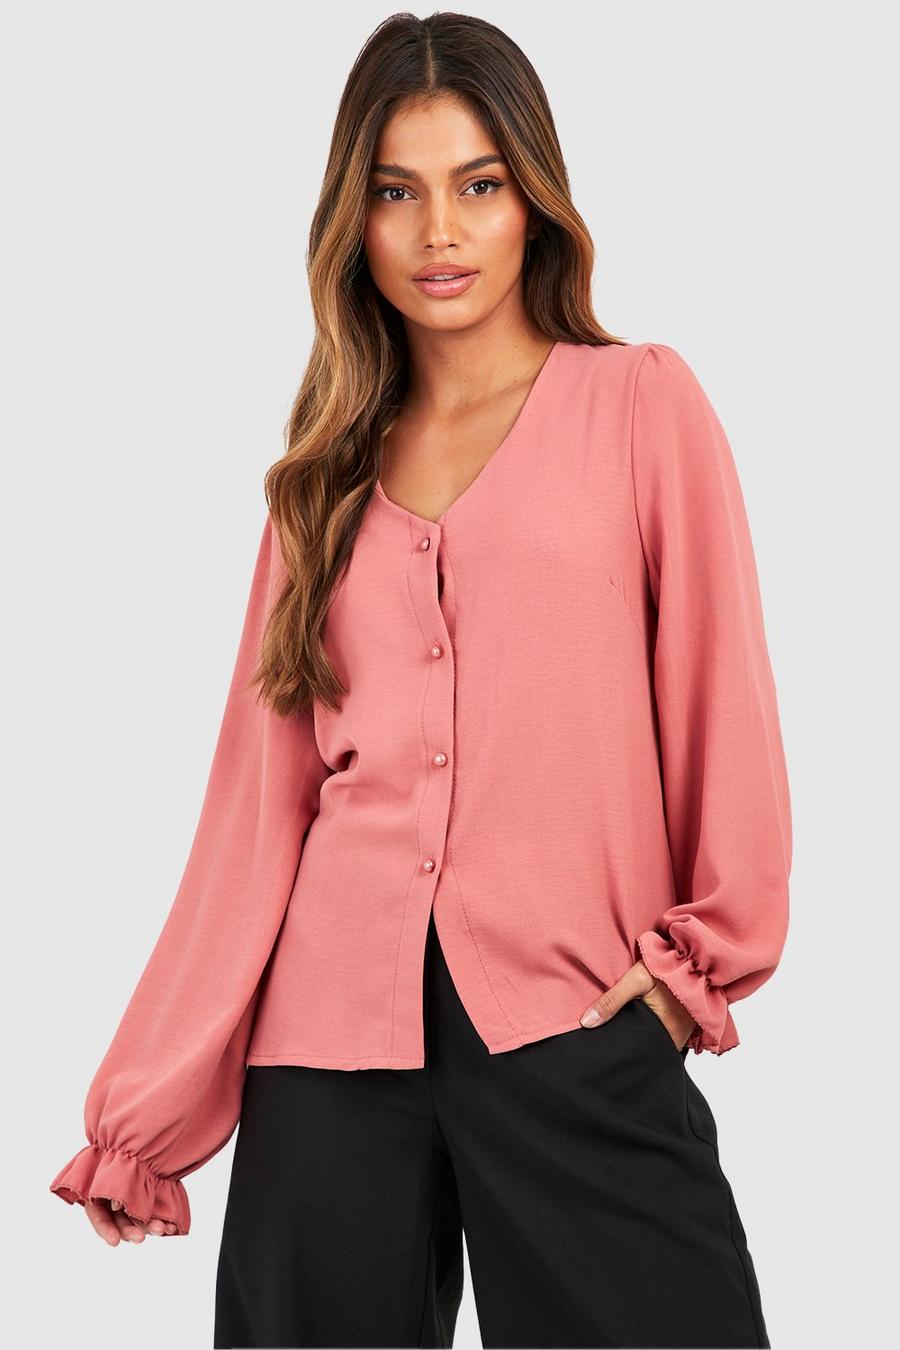 Desert rose Hammered Puff Sleeve Button Front Blouse